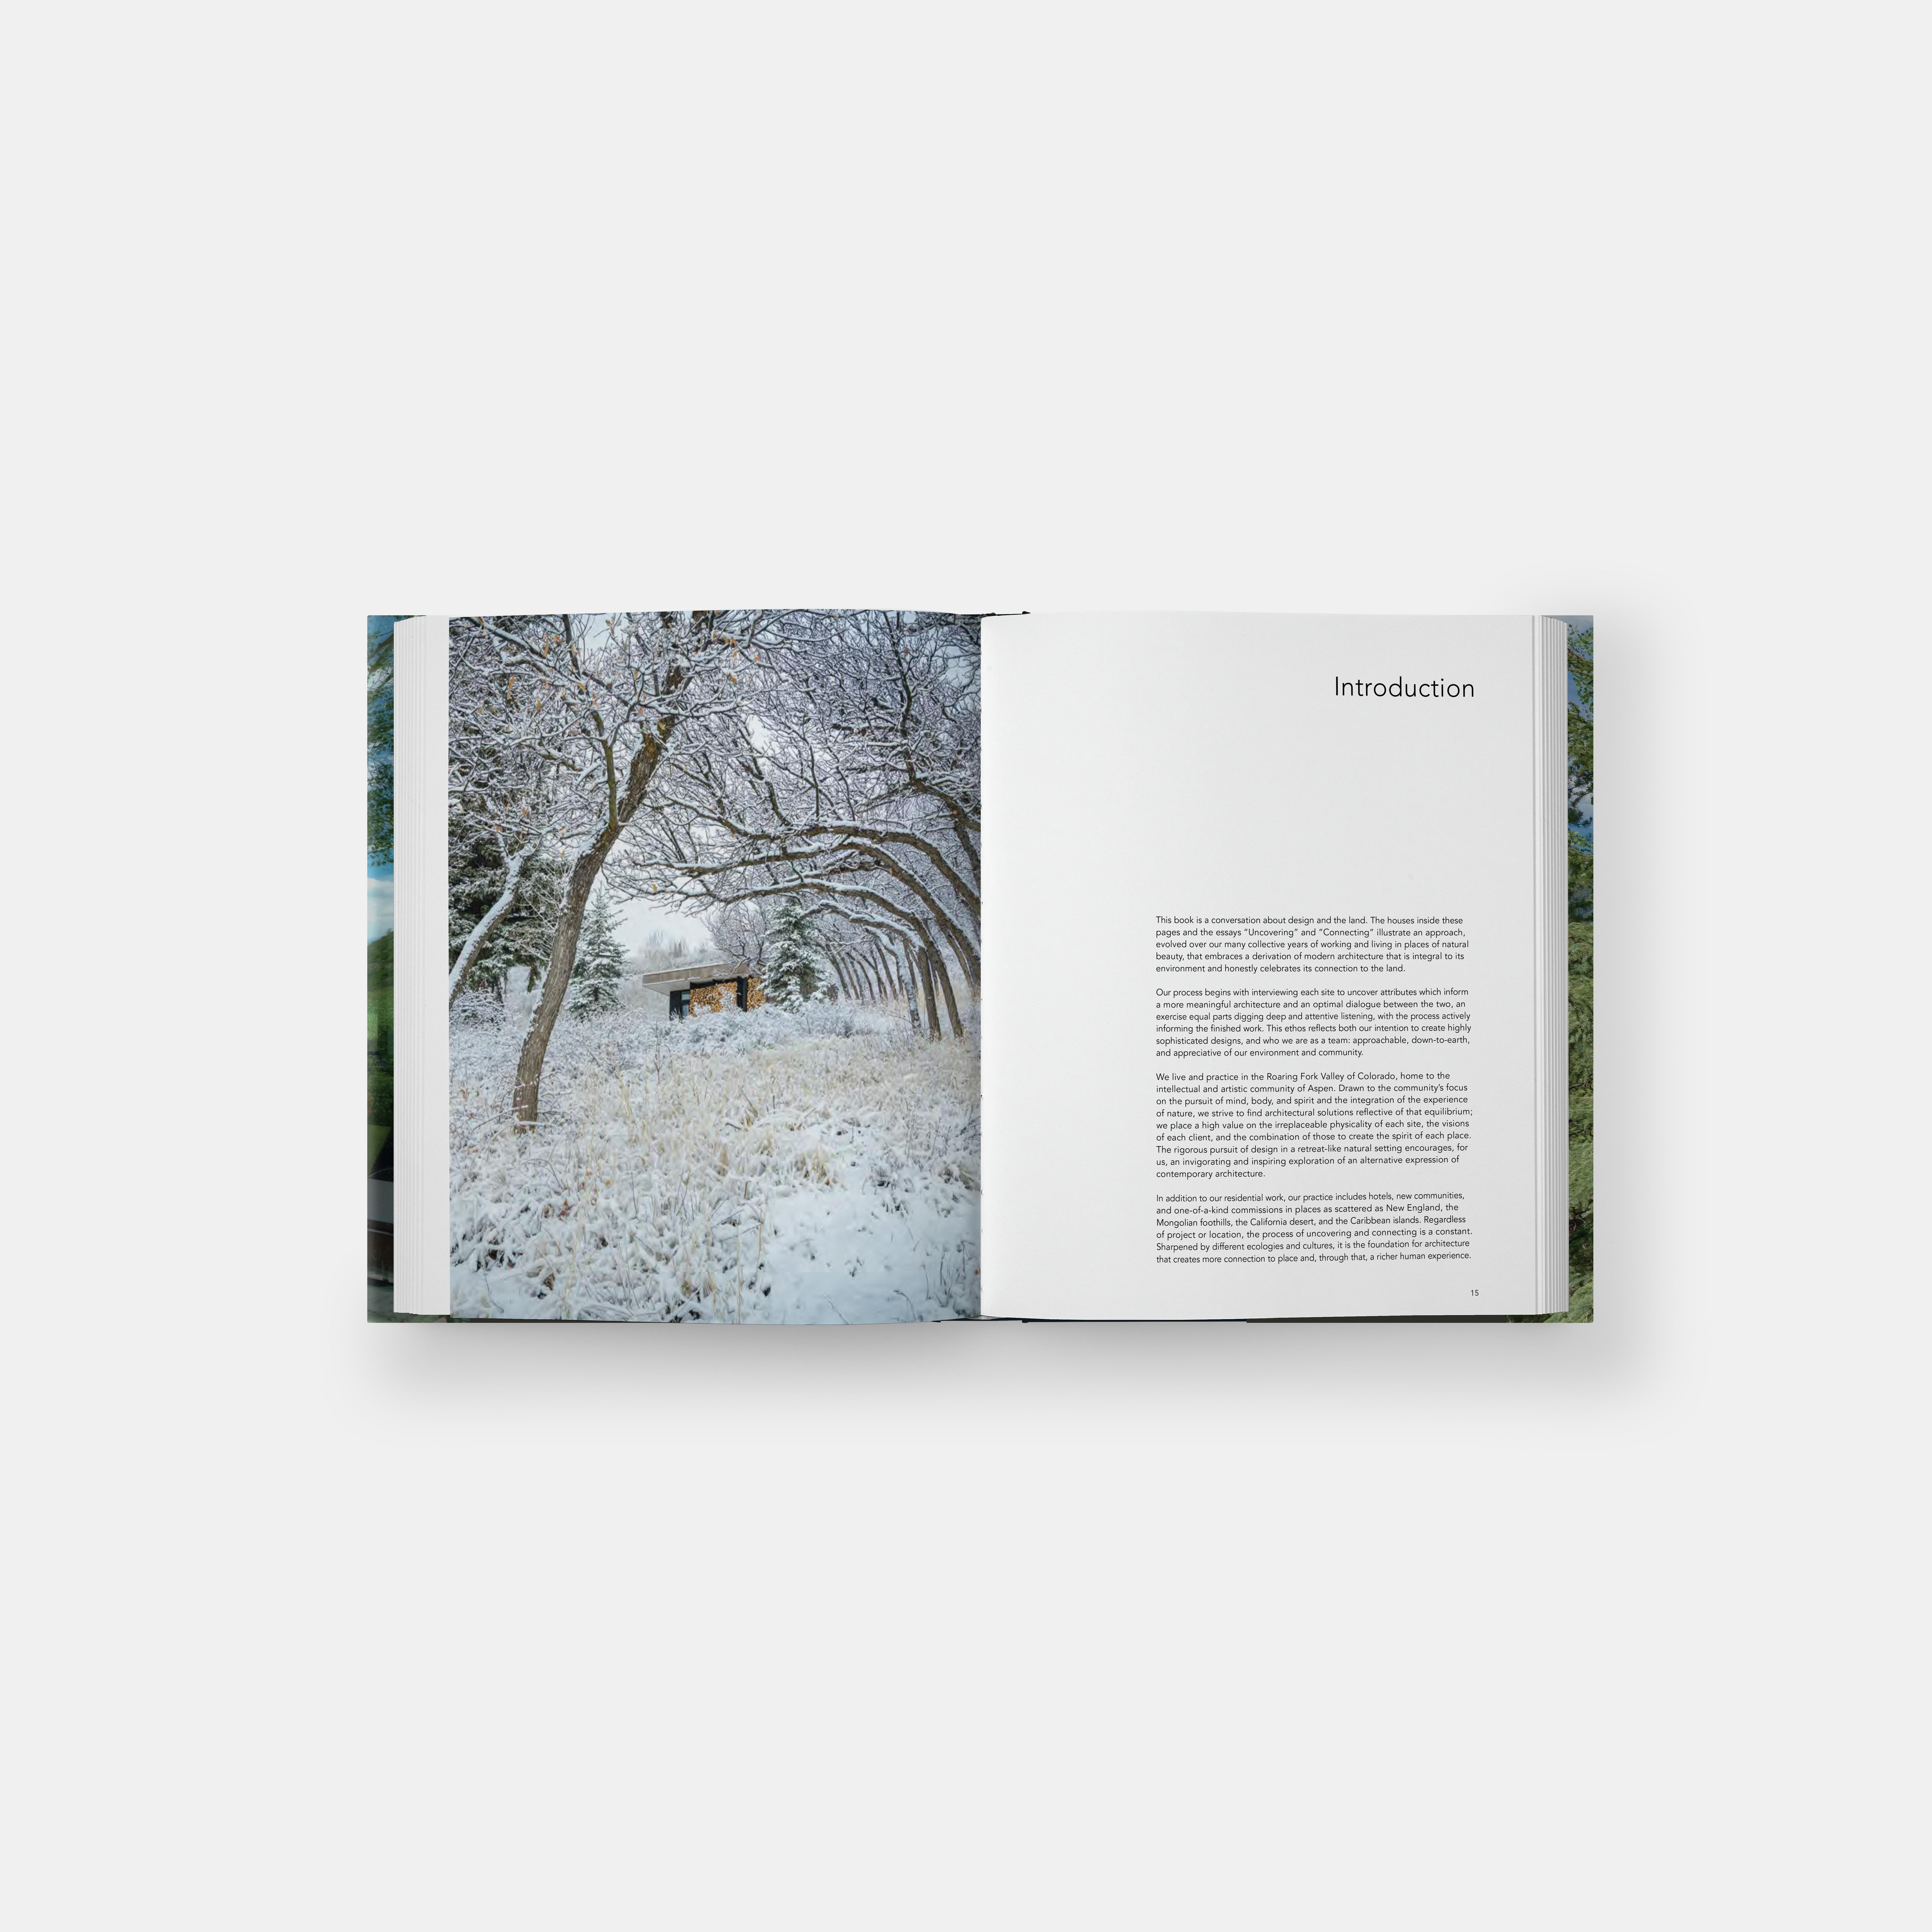 Connection is a monograph of ten residences that articulate the office's design process and exploration of creating architectural solution rooted in natural place.

Connection provides insight into how Colorado-based CCY Architects investigates and